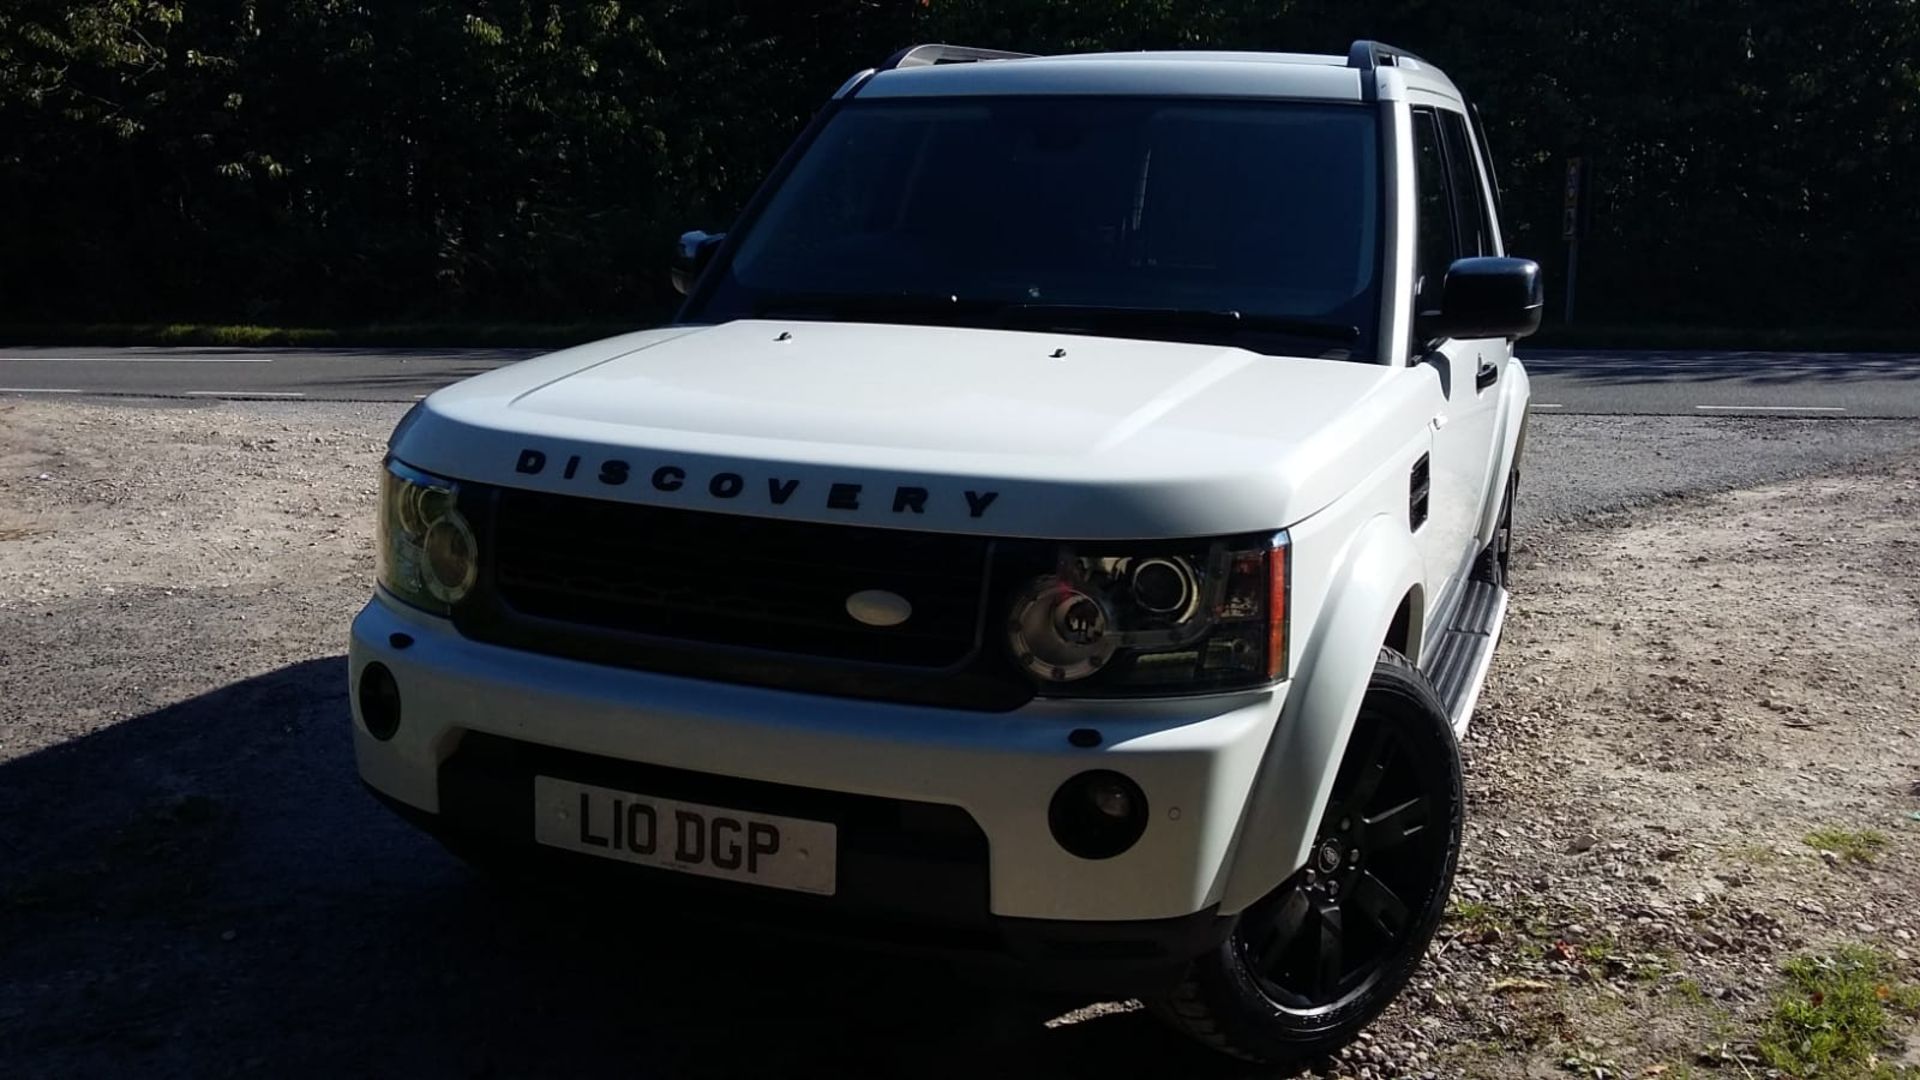 2011/60 REG LAND ROVER DISCOVERY TDV6 AUTOMATIC WHITE DIESEL LIGHT 4X4 *NO VAT* - Image 3 of 11